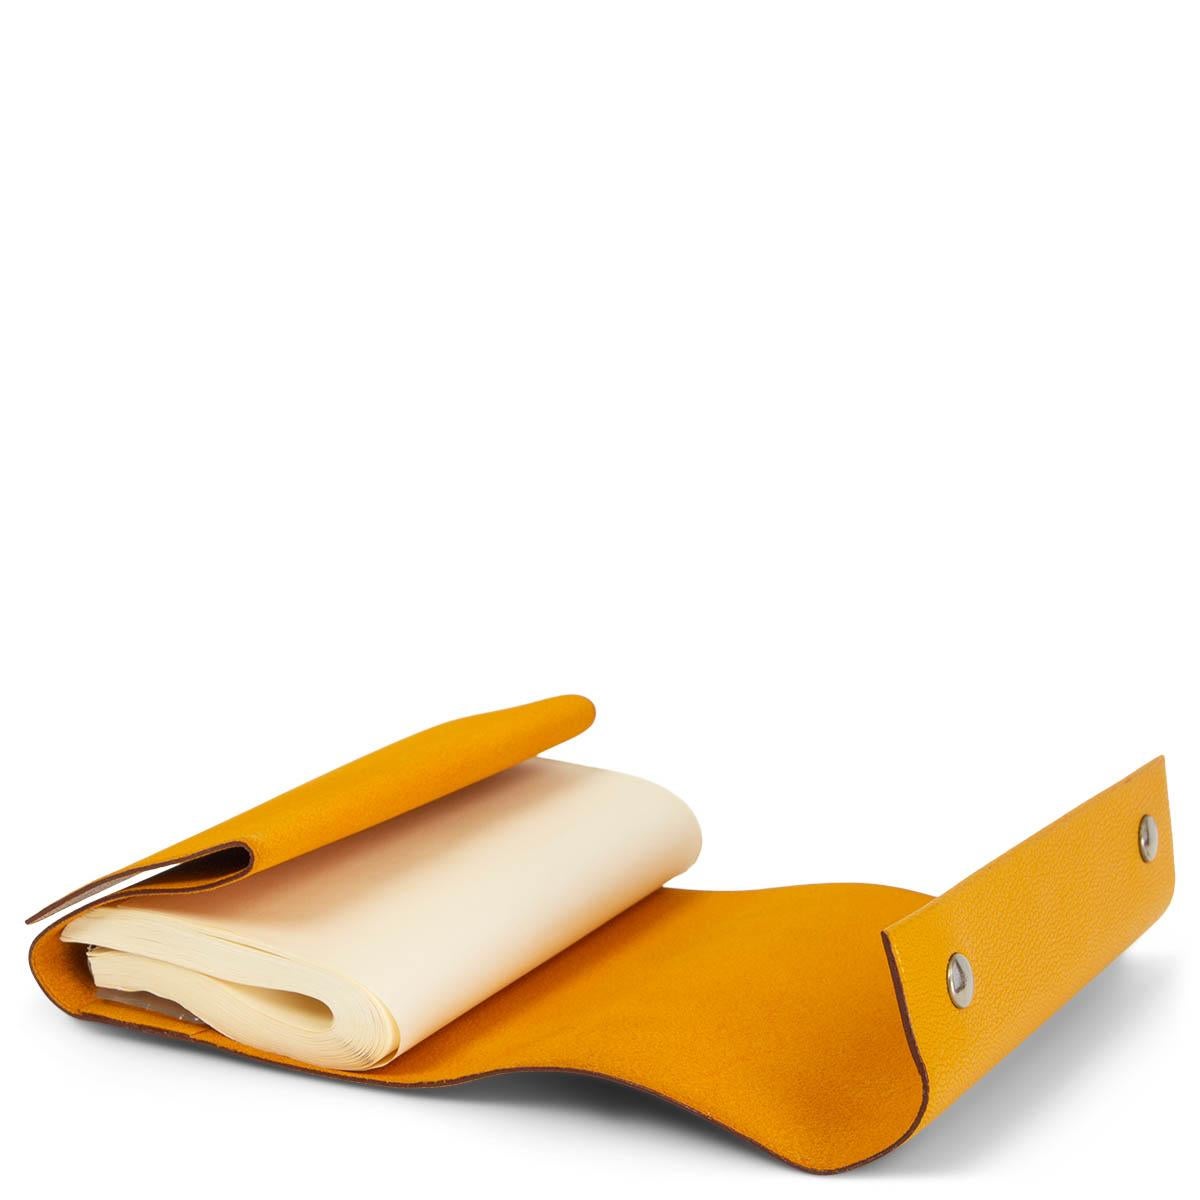 HERMES Jaune yellow Mysore leather CAHIER ROULE Roll Notebook In Fair Condition For Sale In Zürich, CH